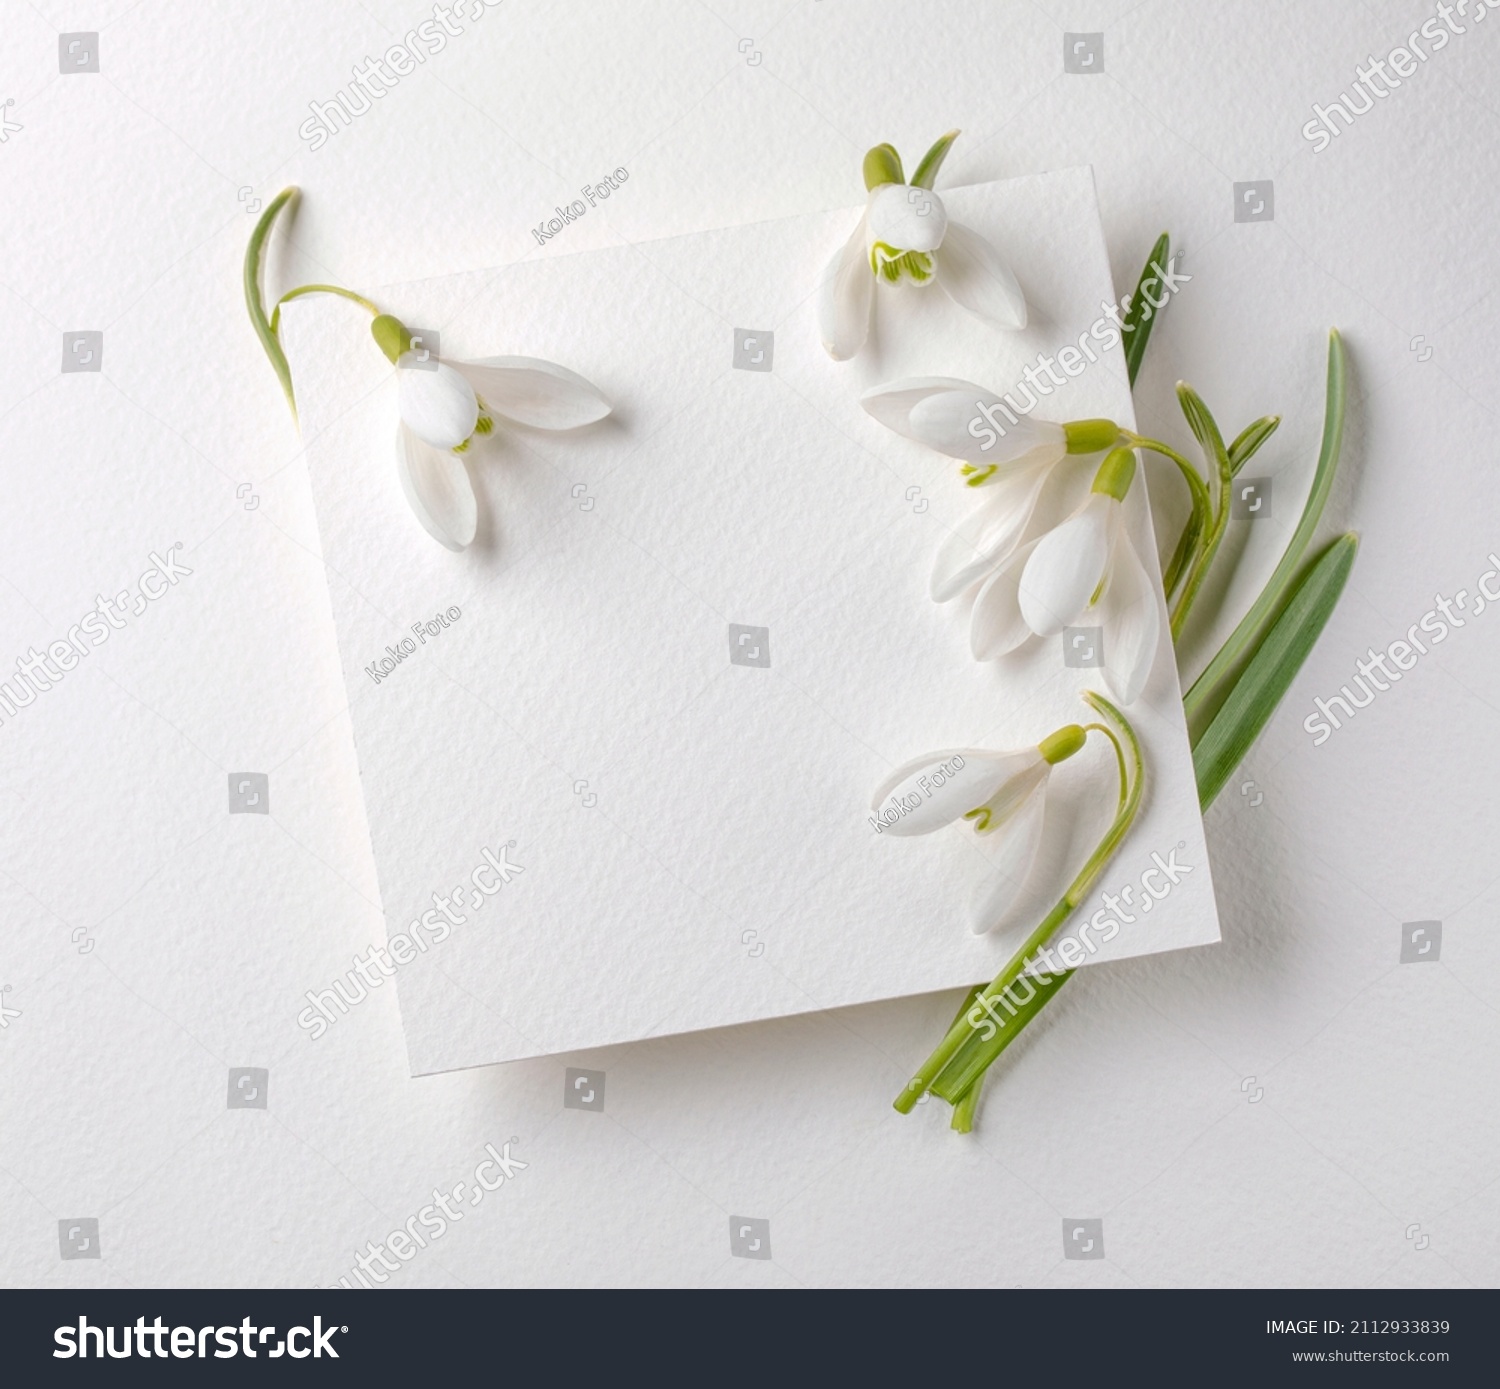 Snowdrops flowers with white card on white background. Creative congratulations layout from snowdrops on white paper. Spring flower concept.  #2112933839